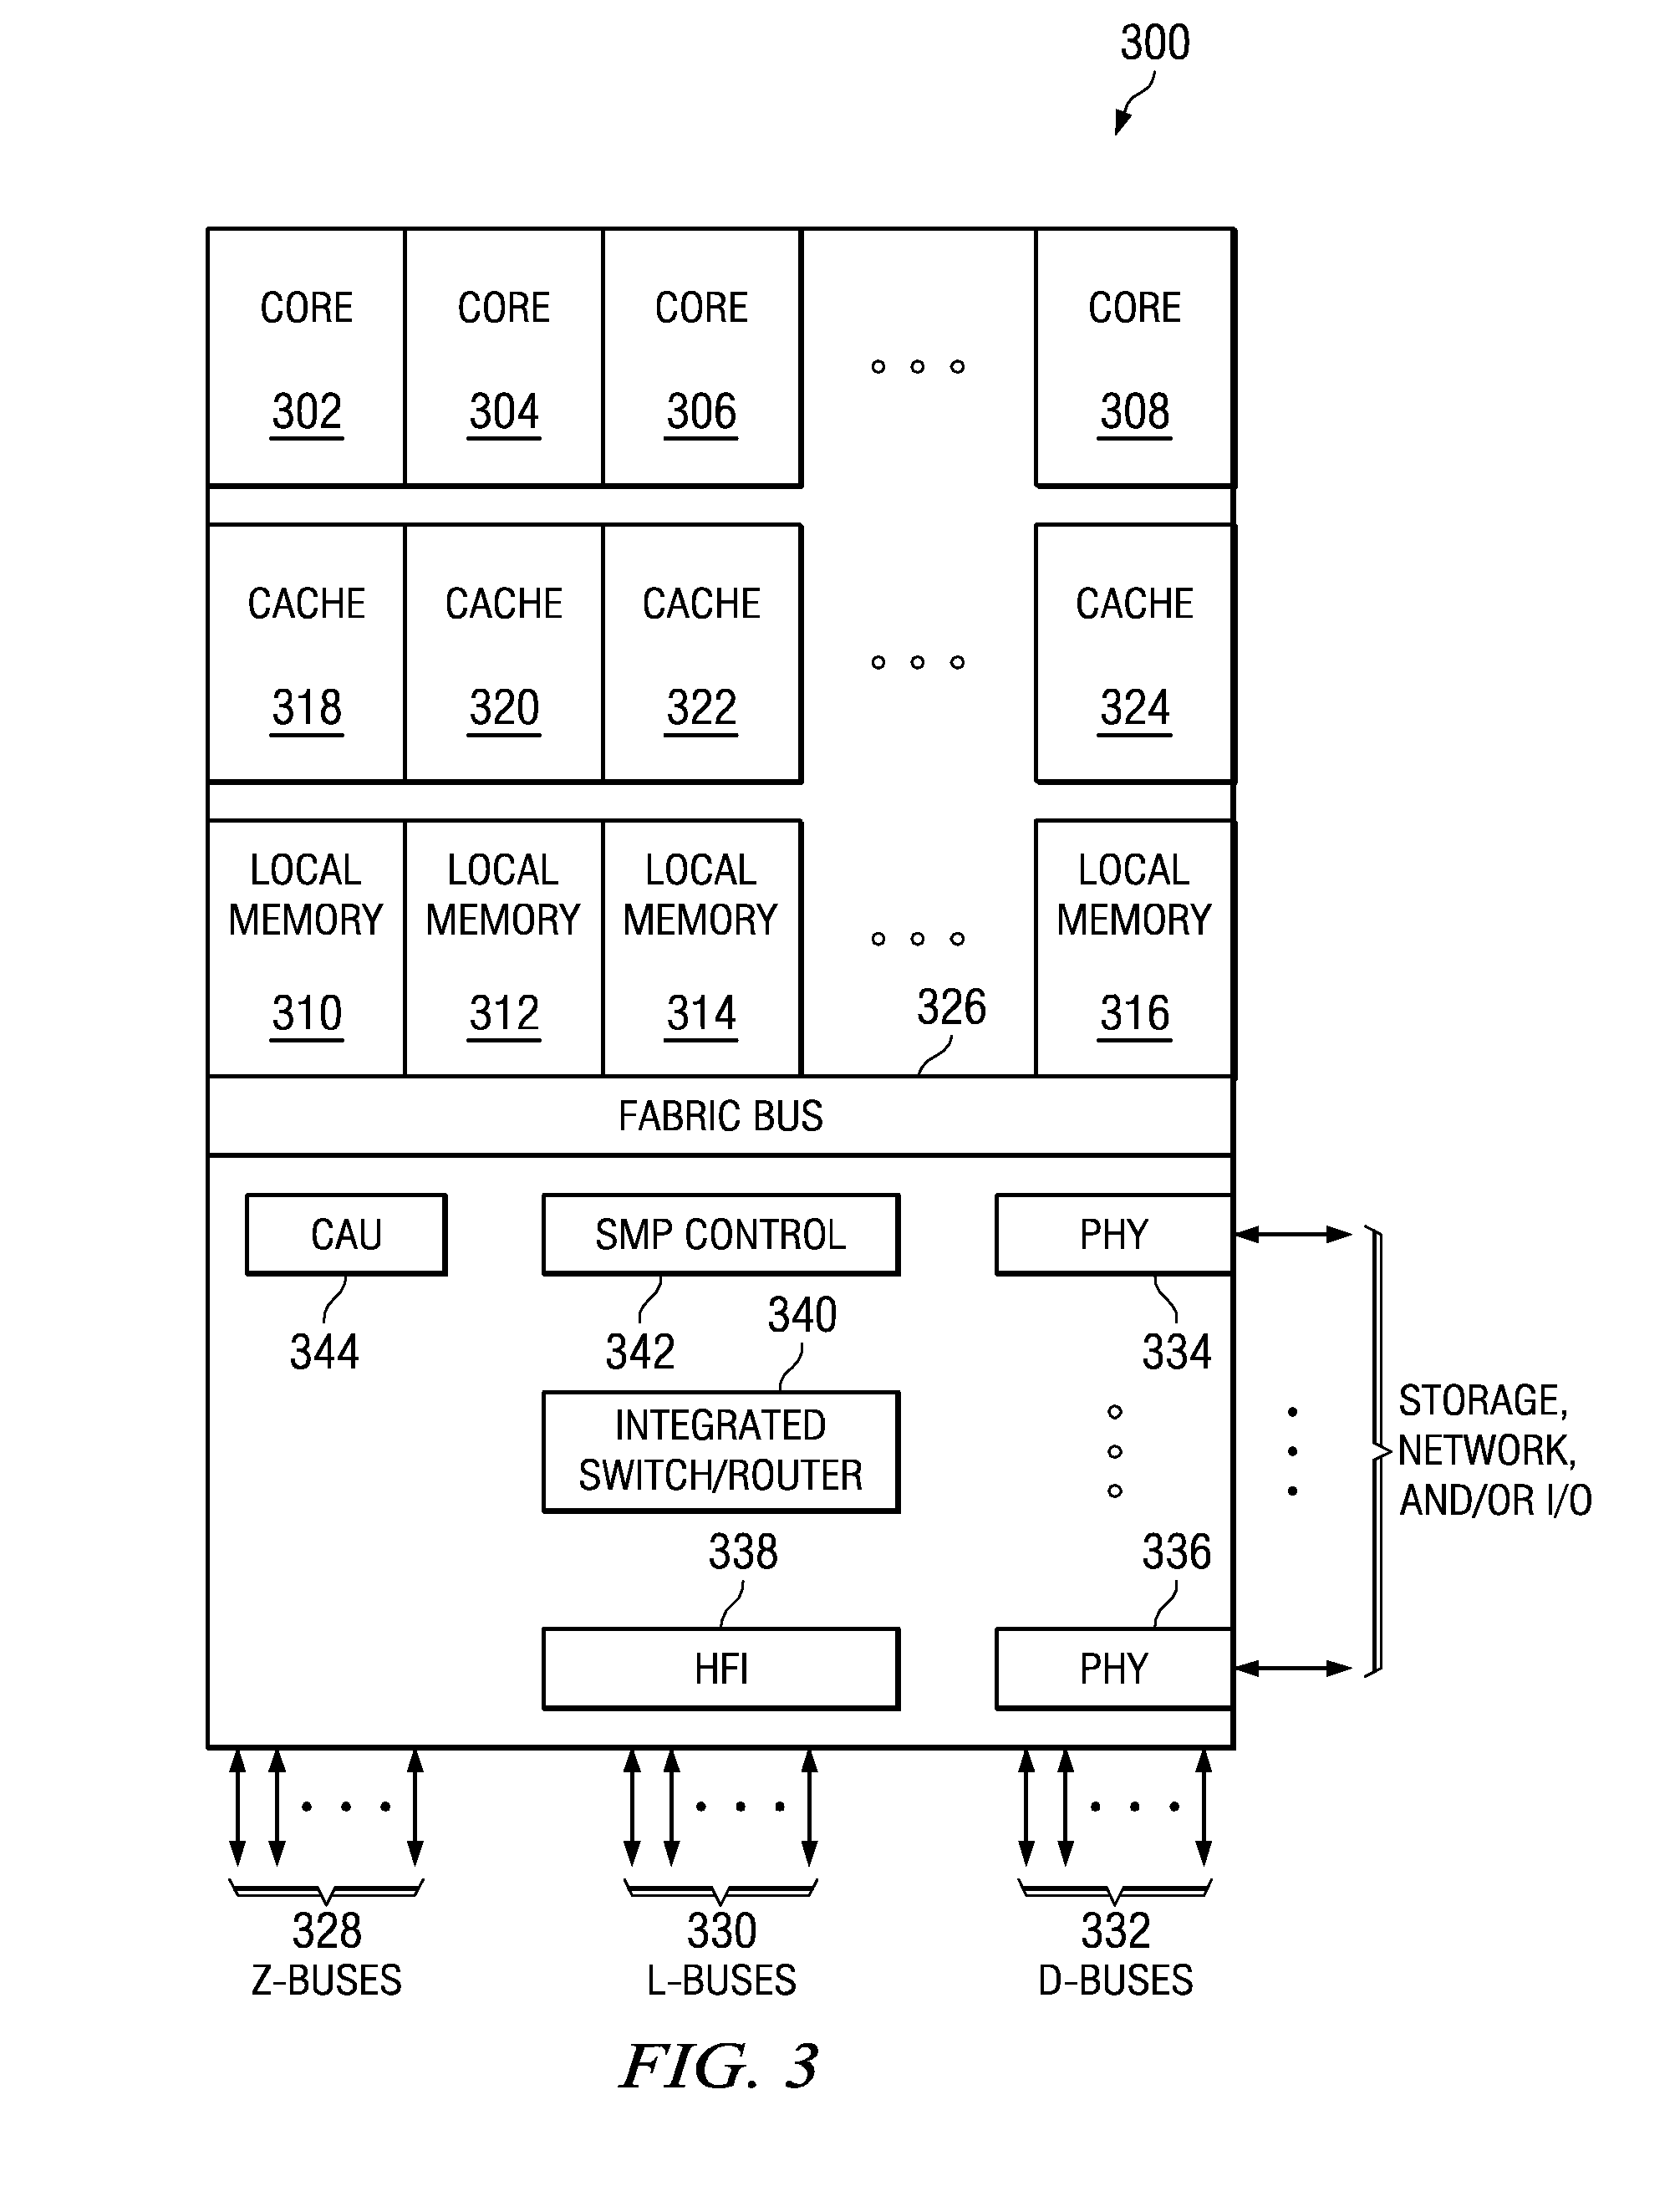 Method for Providing a Cluster-Wide System Clock in a Multi-Tiered Full-Graph Interconnect Architecture